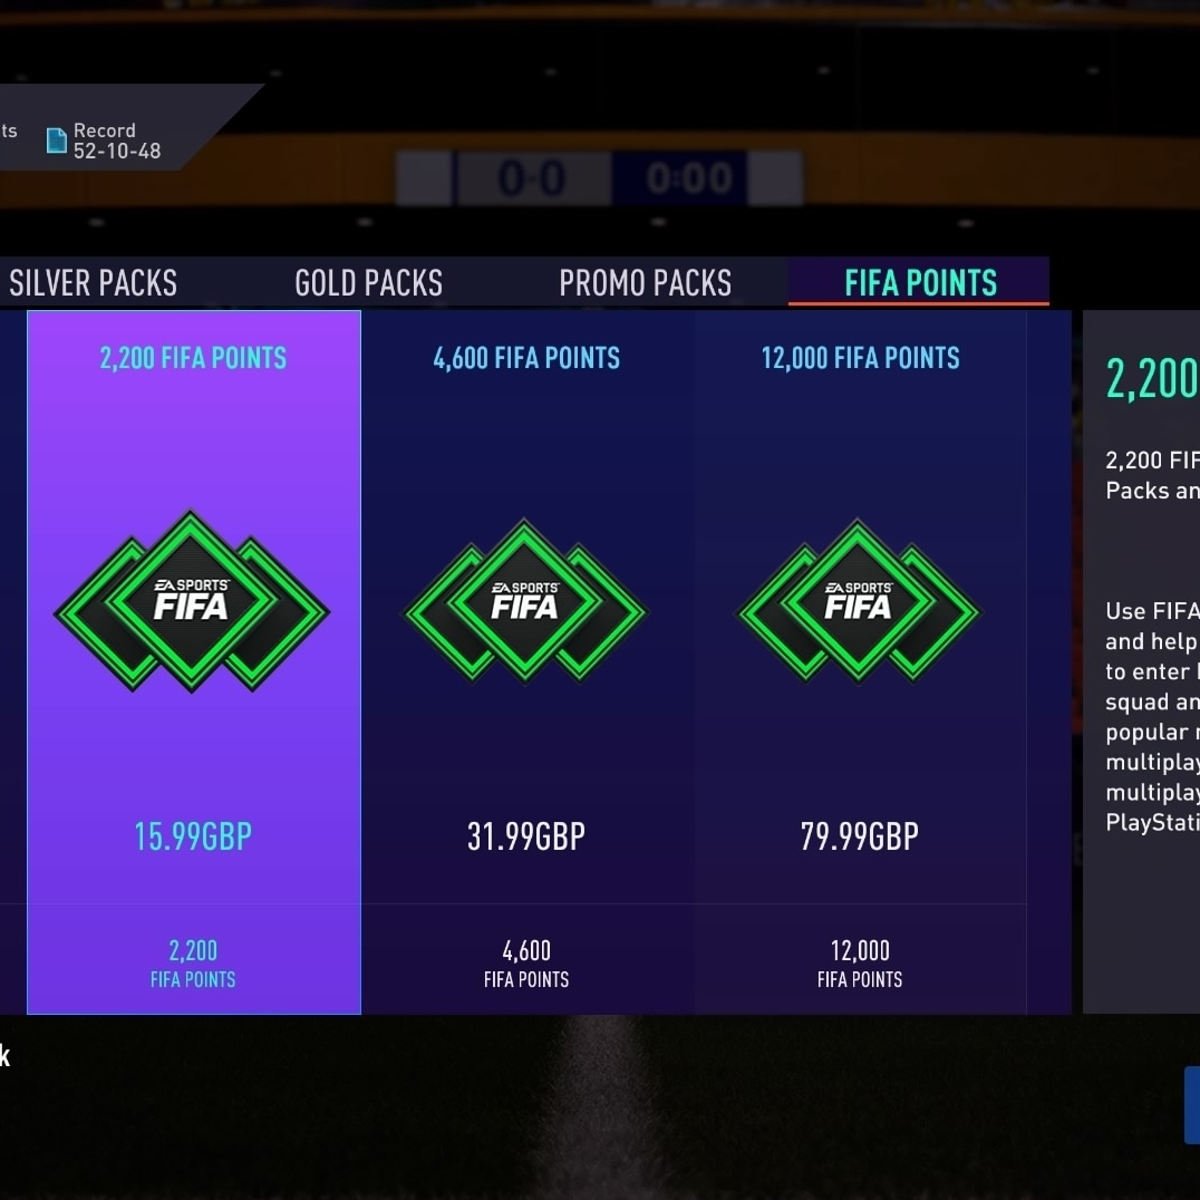 FIFA 21 will soon let track and set limits on how many FIFA Points you buy from the in-game store | Eurogamer.net